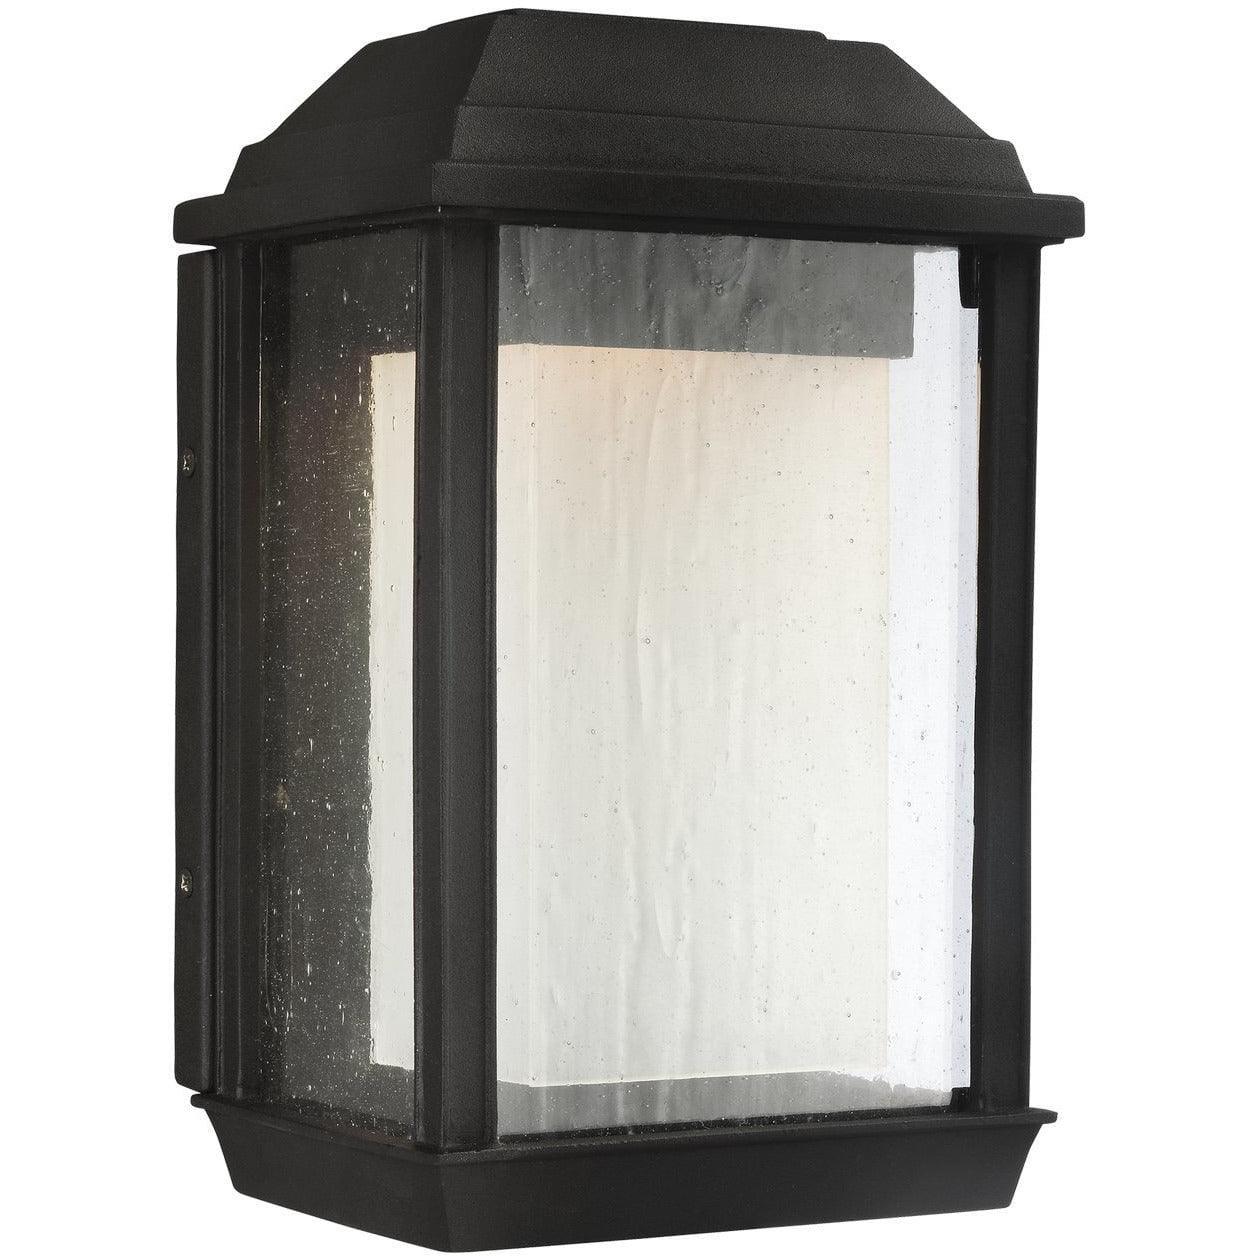 Generation Lighting - McHenry LED Outdoor Wall Sconce - OL12800TXB-L1 | Montreal Lighting & Hardware